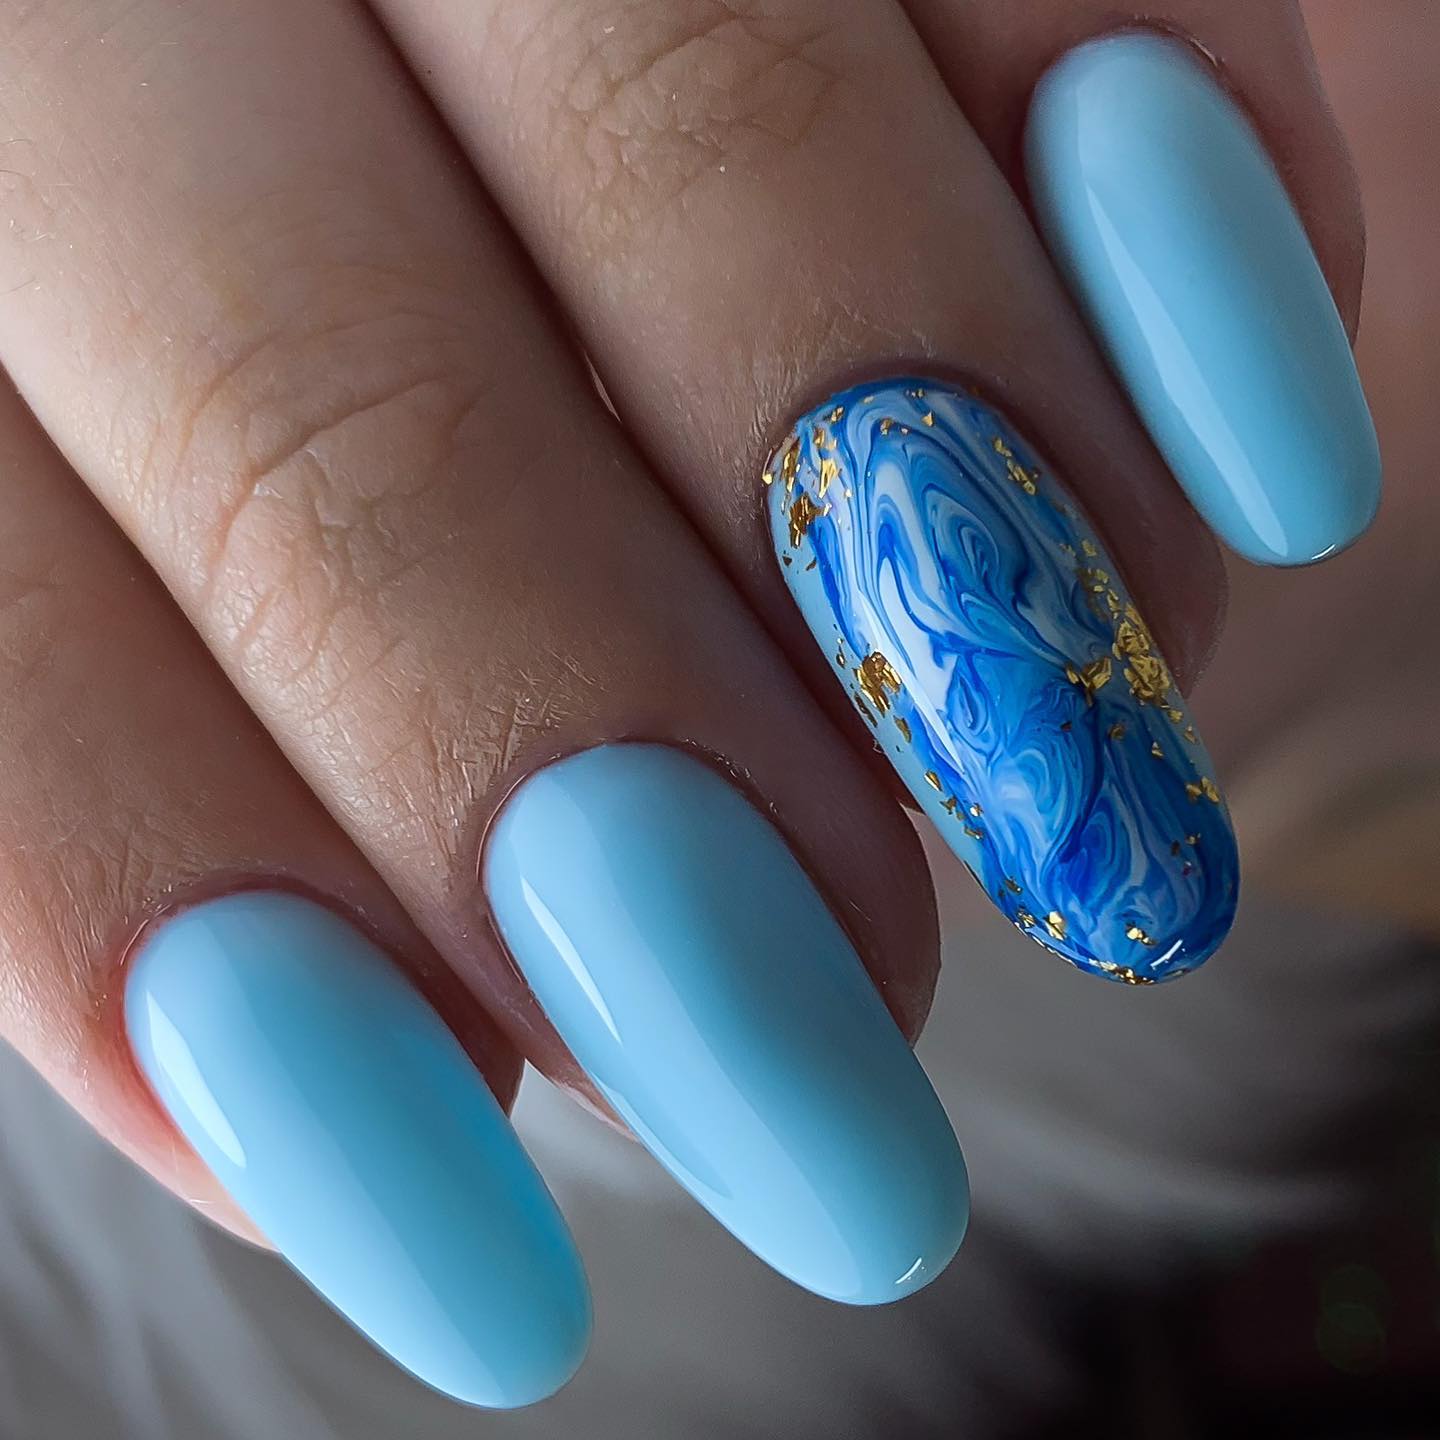 Water marbling is a nice way to take your nails to a whole different level. Dark blue color can be used to give this effect.